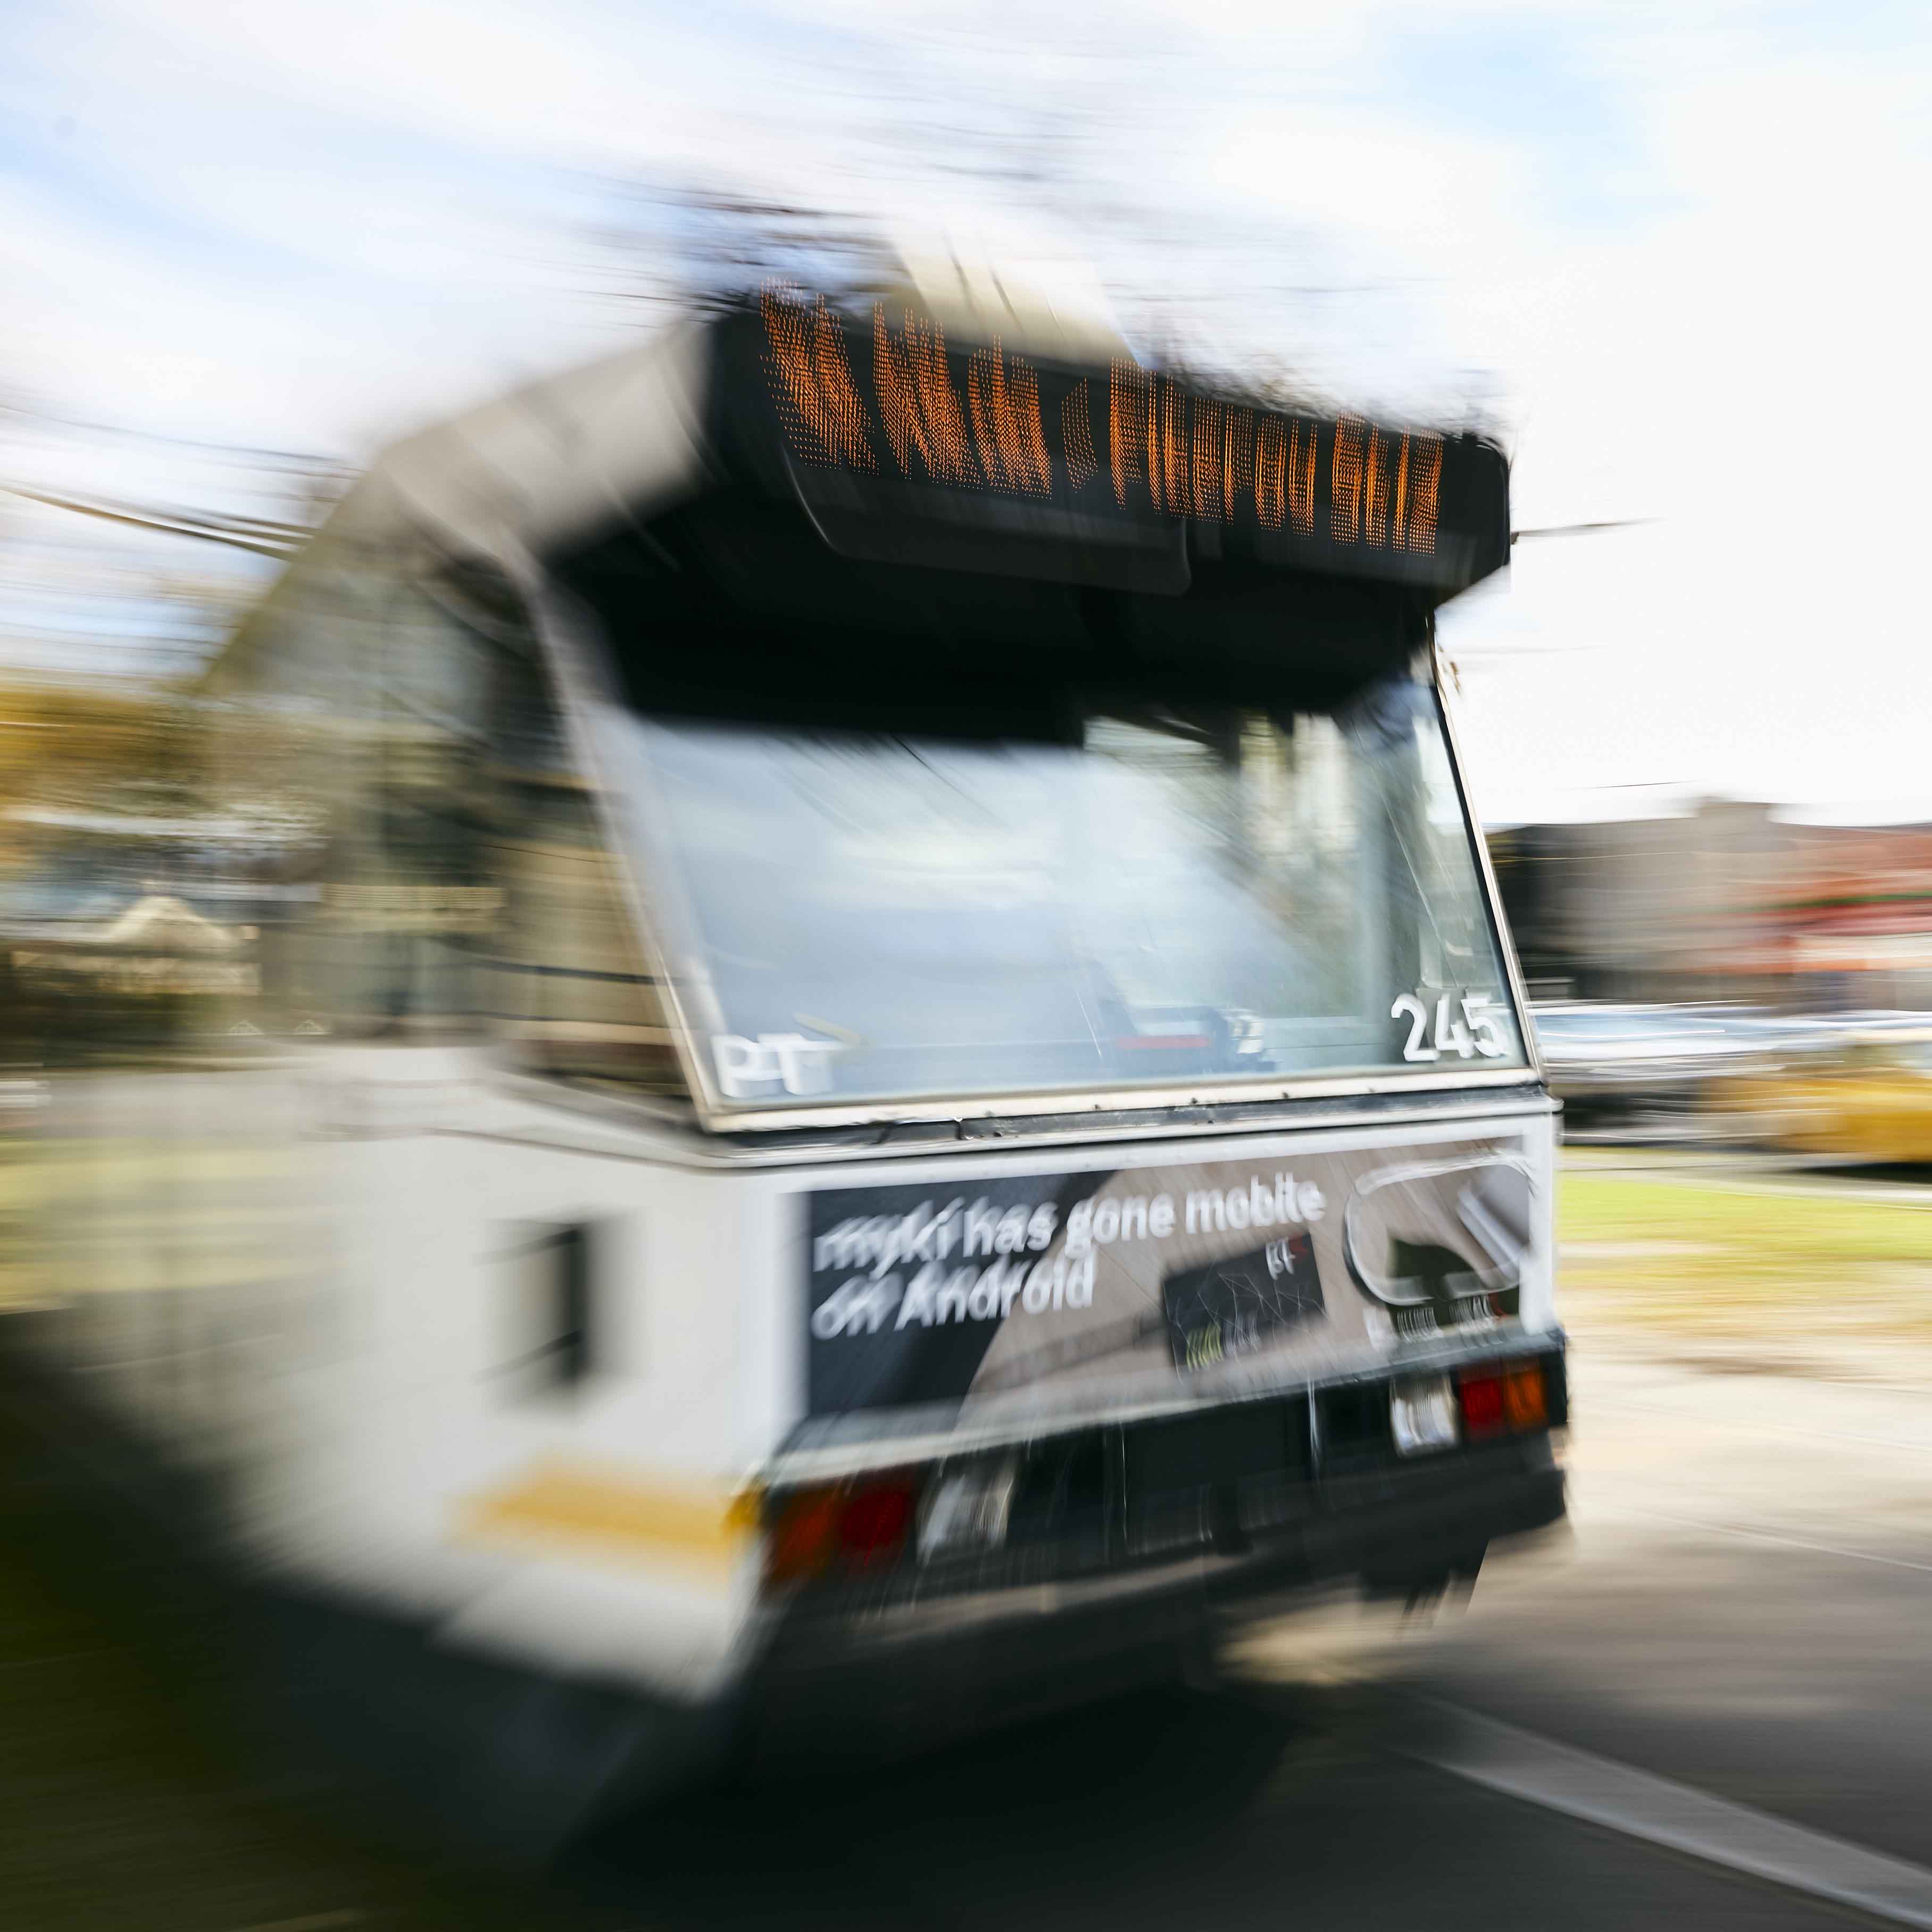 Image shows a blurred tram in motion as it passes by. 